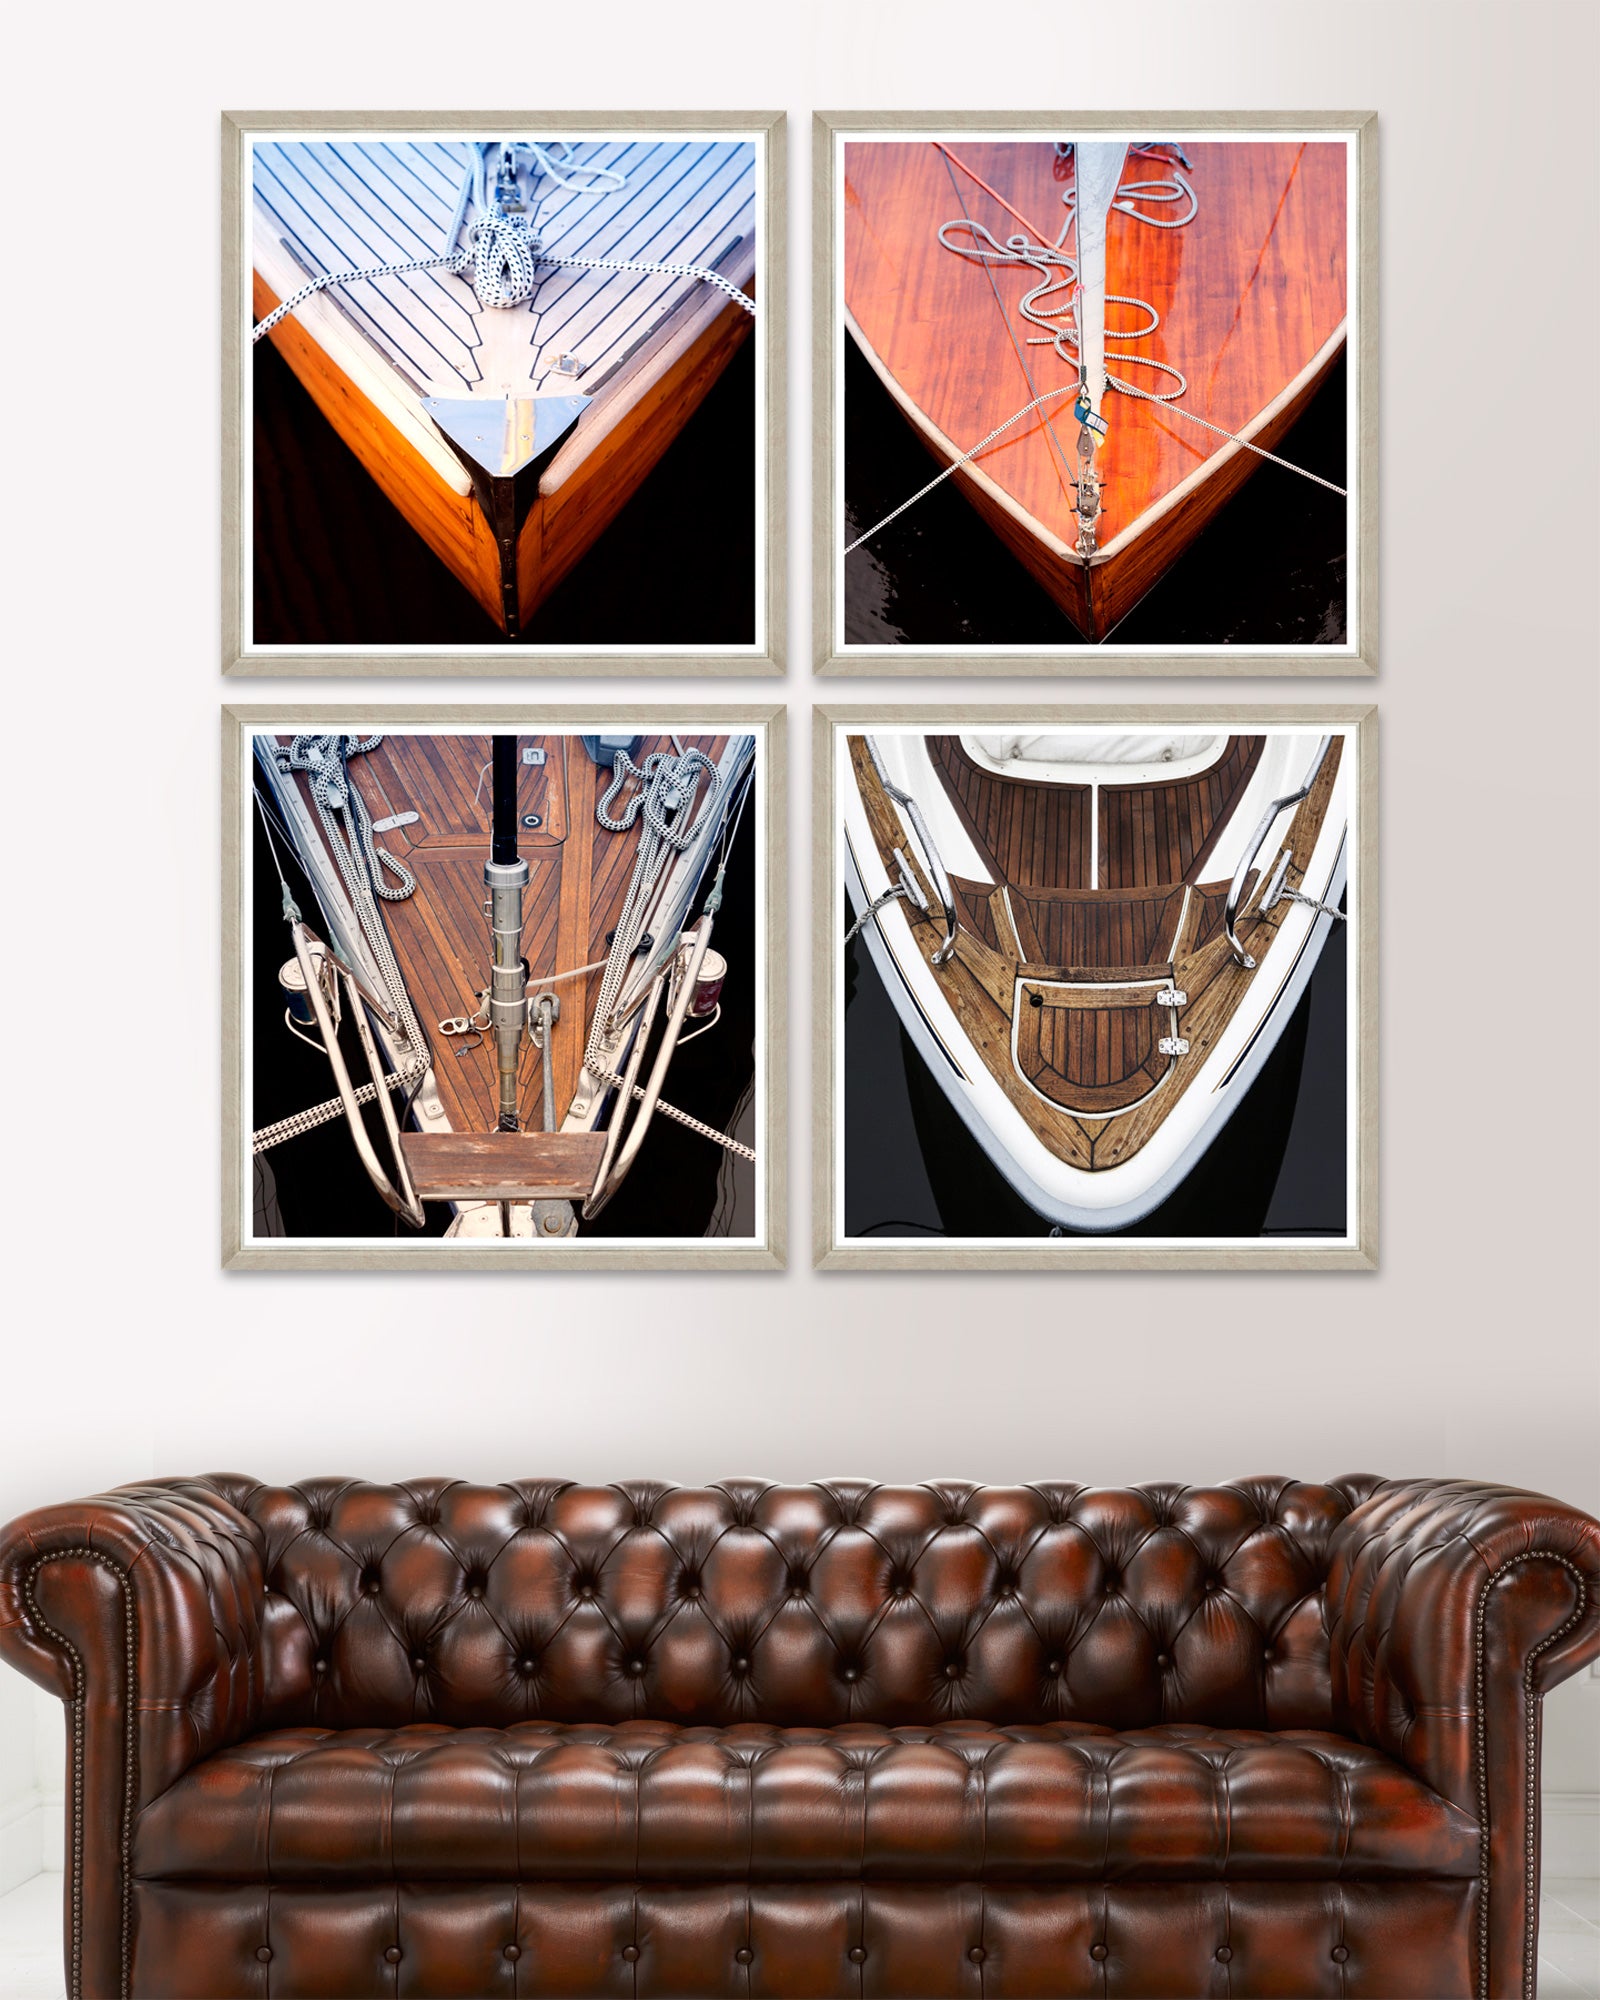 Tablou 4 piese Framed Art Wood Boat Fronts (5)